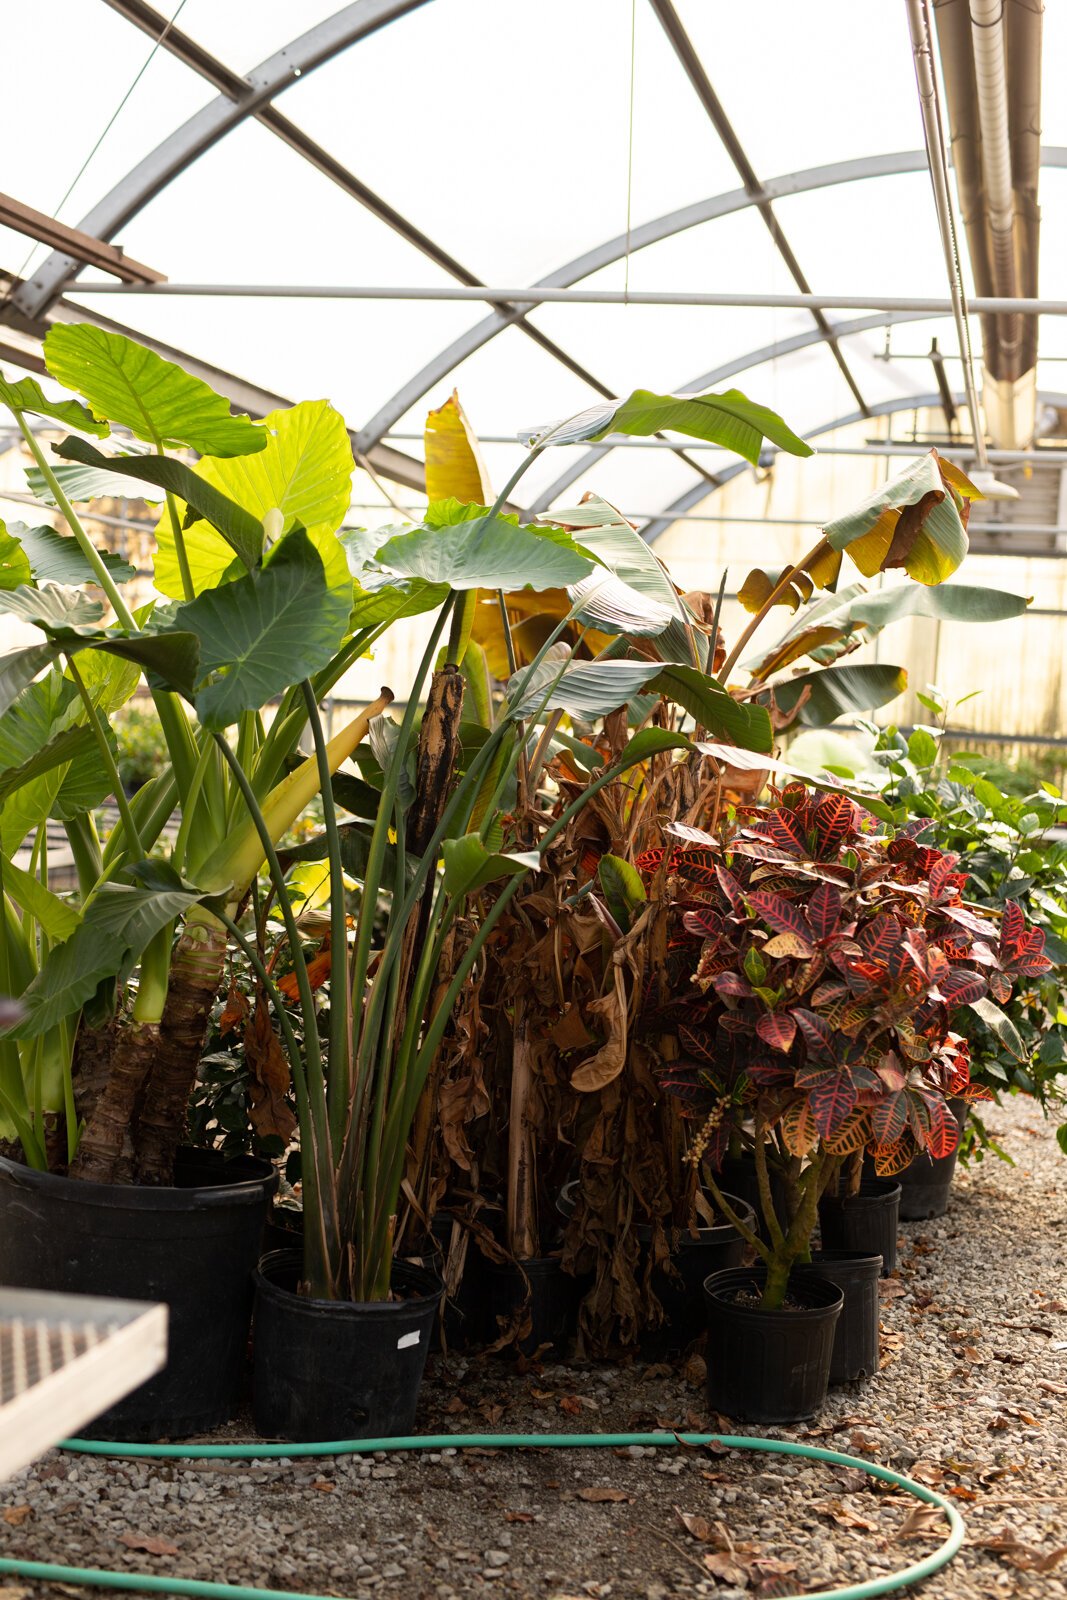 The Landscape & Horticulture Lawton Greenhouse grows a variety of plants for the Fort Wayne community.